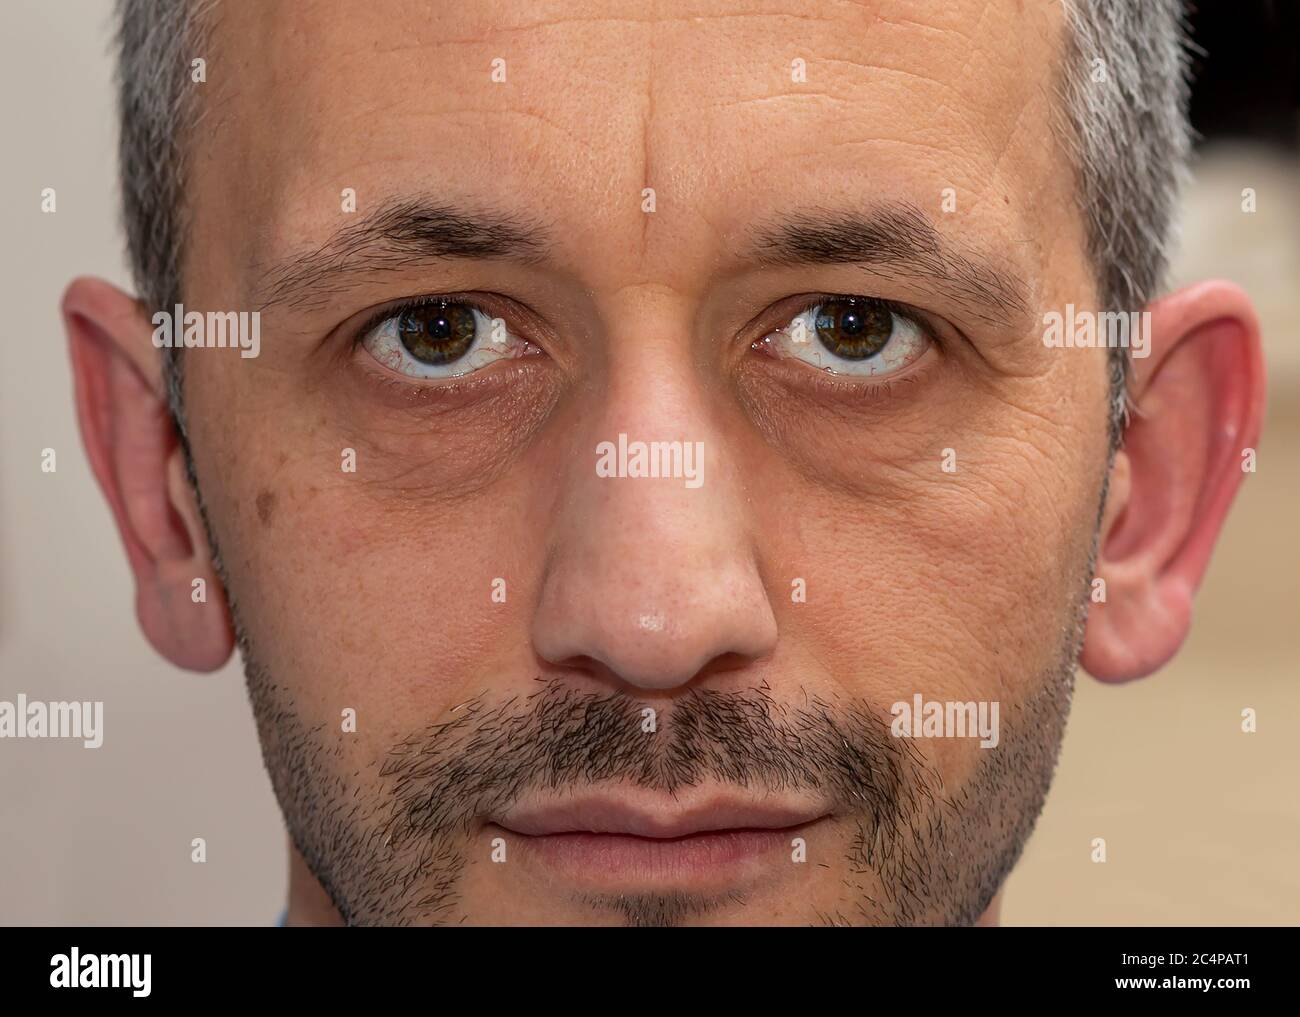 a causal white hair man eye. A green eye the causal man is looking at the camera Stock Photo